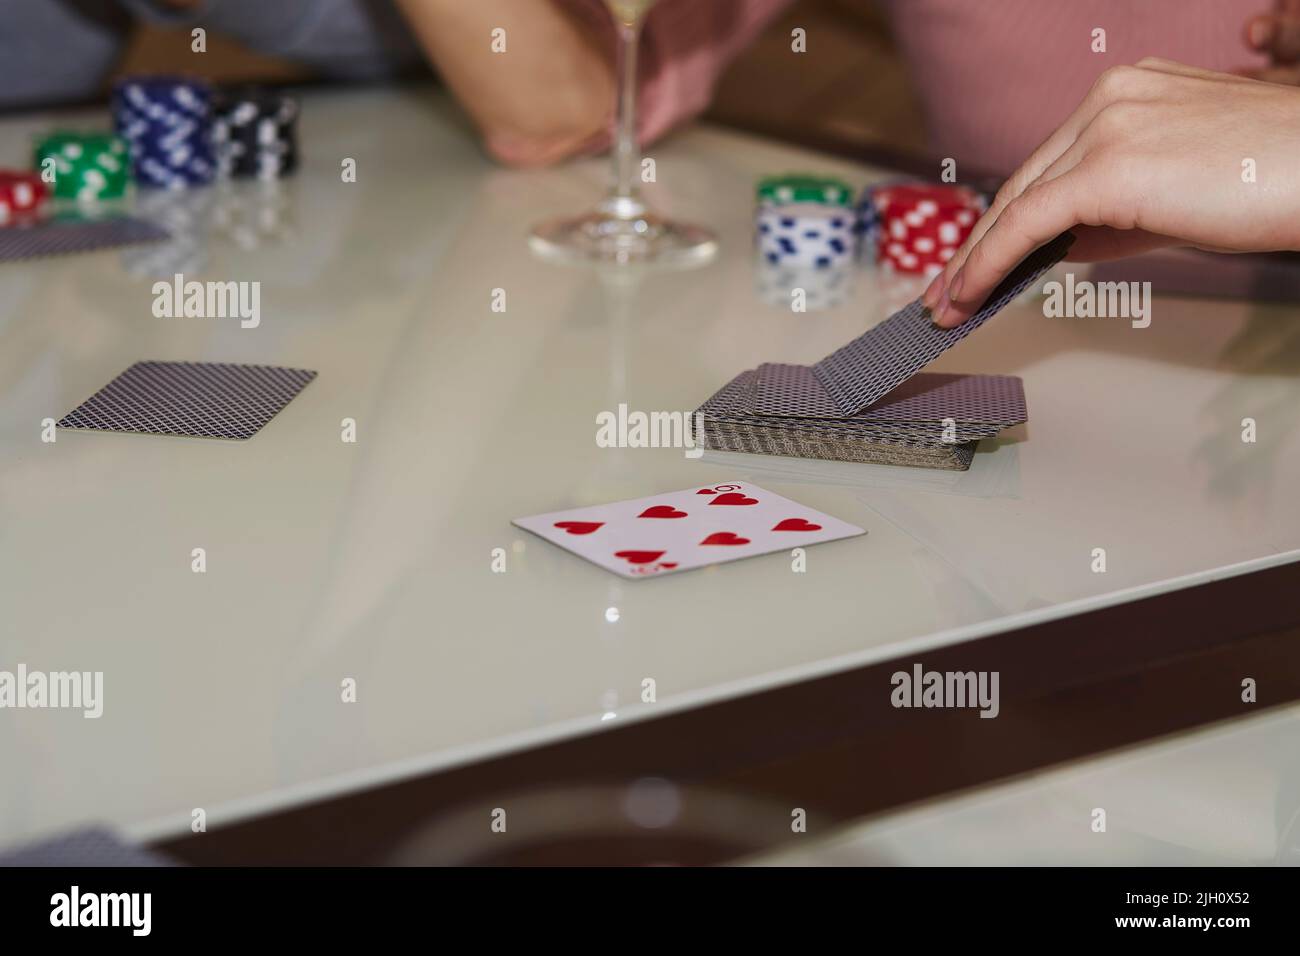 Women's hands take cards. Concept of playing poker on the table with chips and cards. Gambling concept. Enjoying the moment, digital detox with friends. Selective focus. Stock Photo